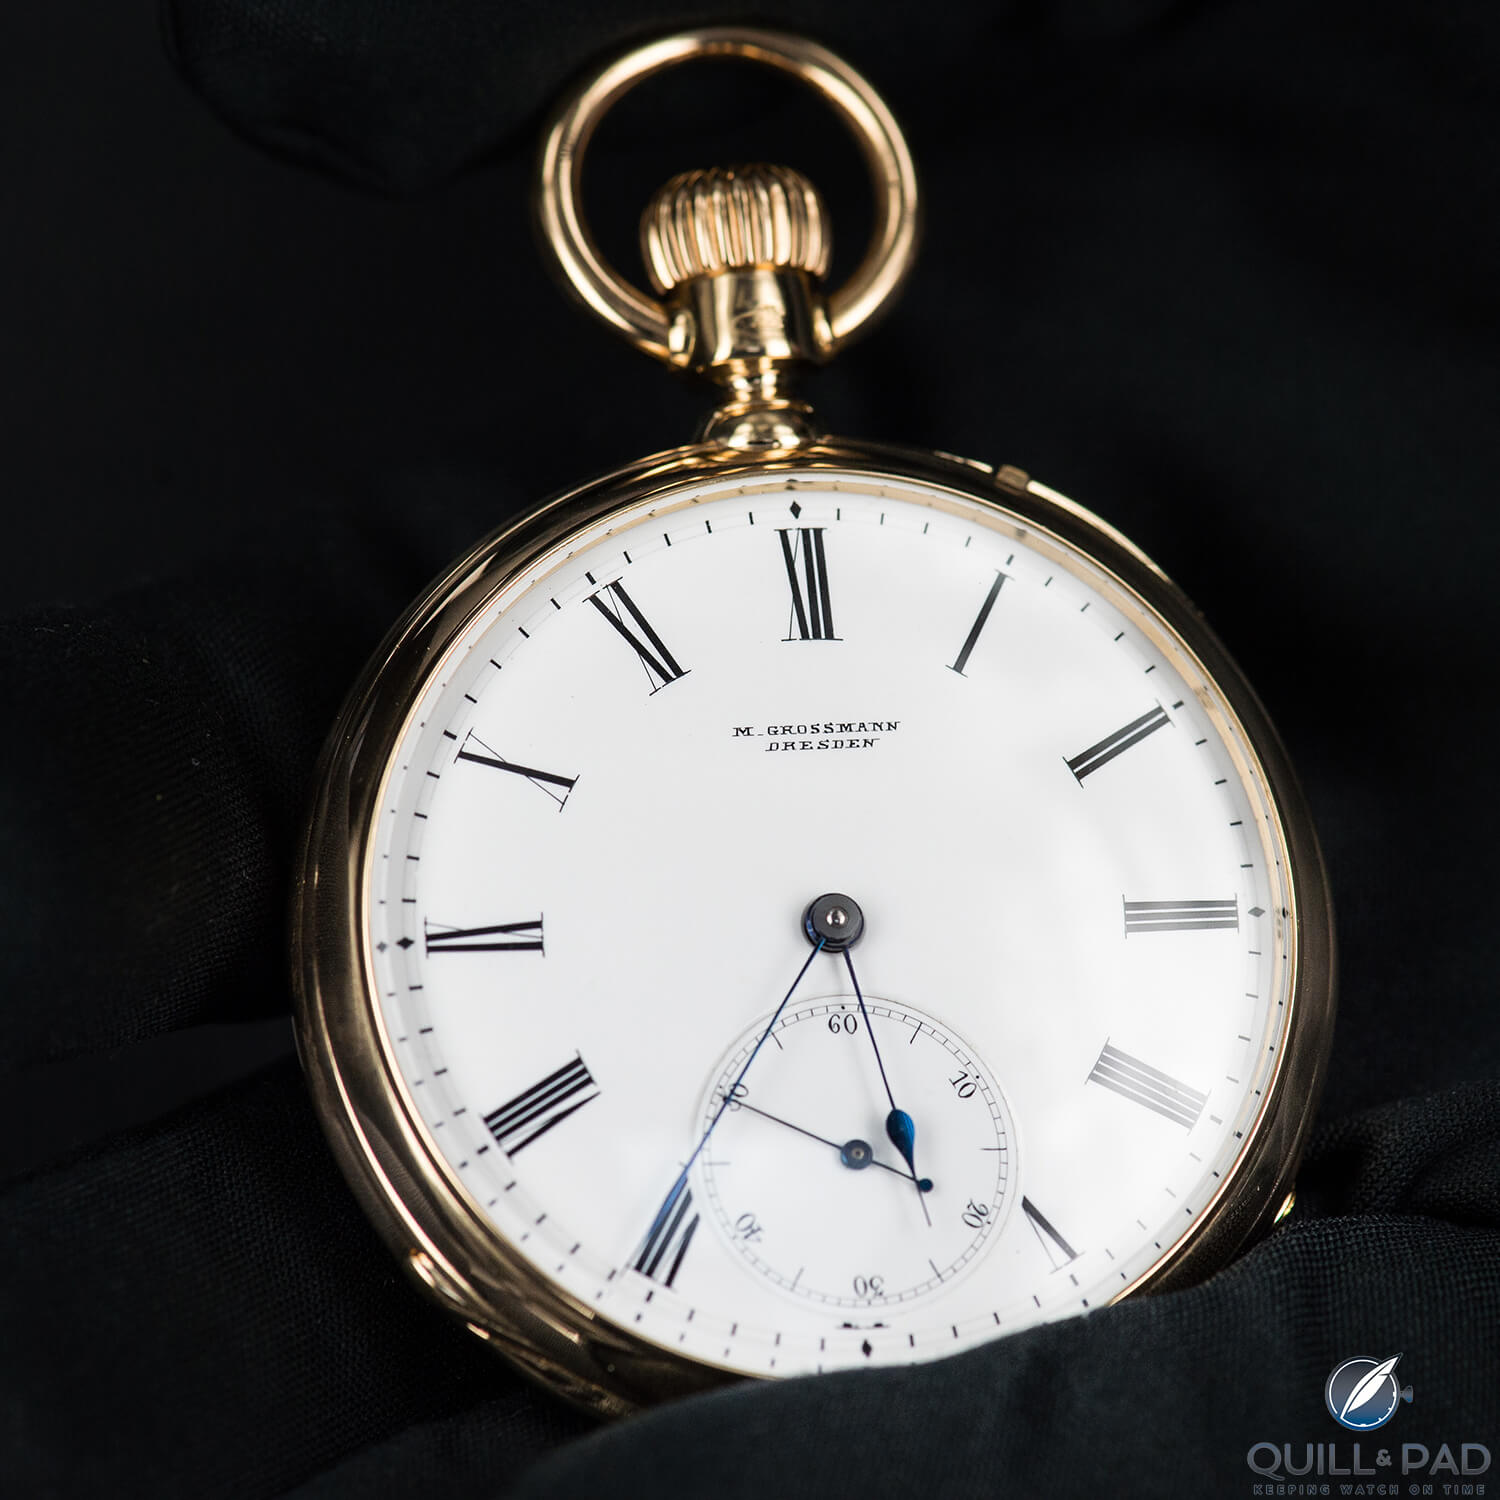 Pocket watch half of the two-part Moritz Grossmann Atum Homage wristwatch and pocket watch set for Only Watch 2017